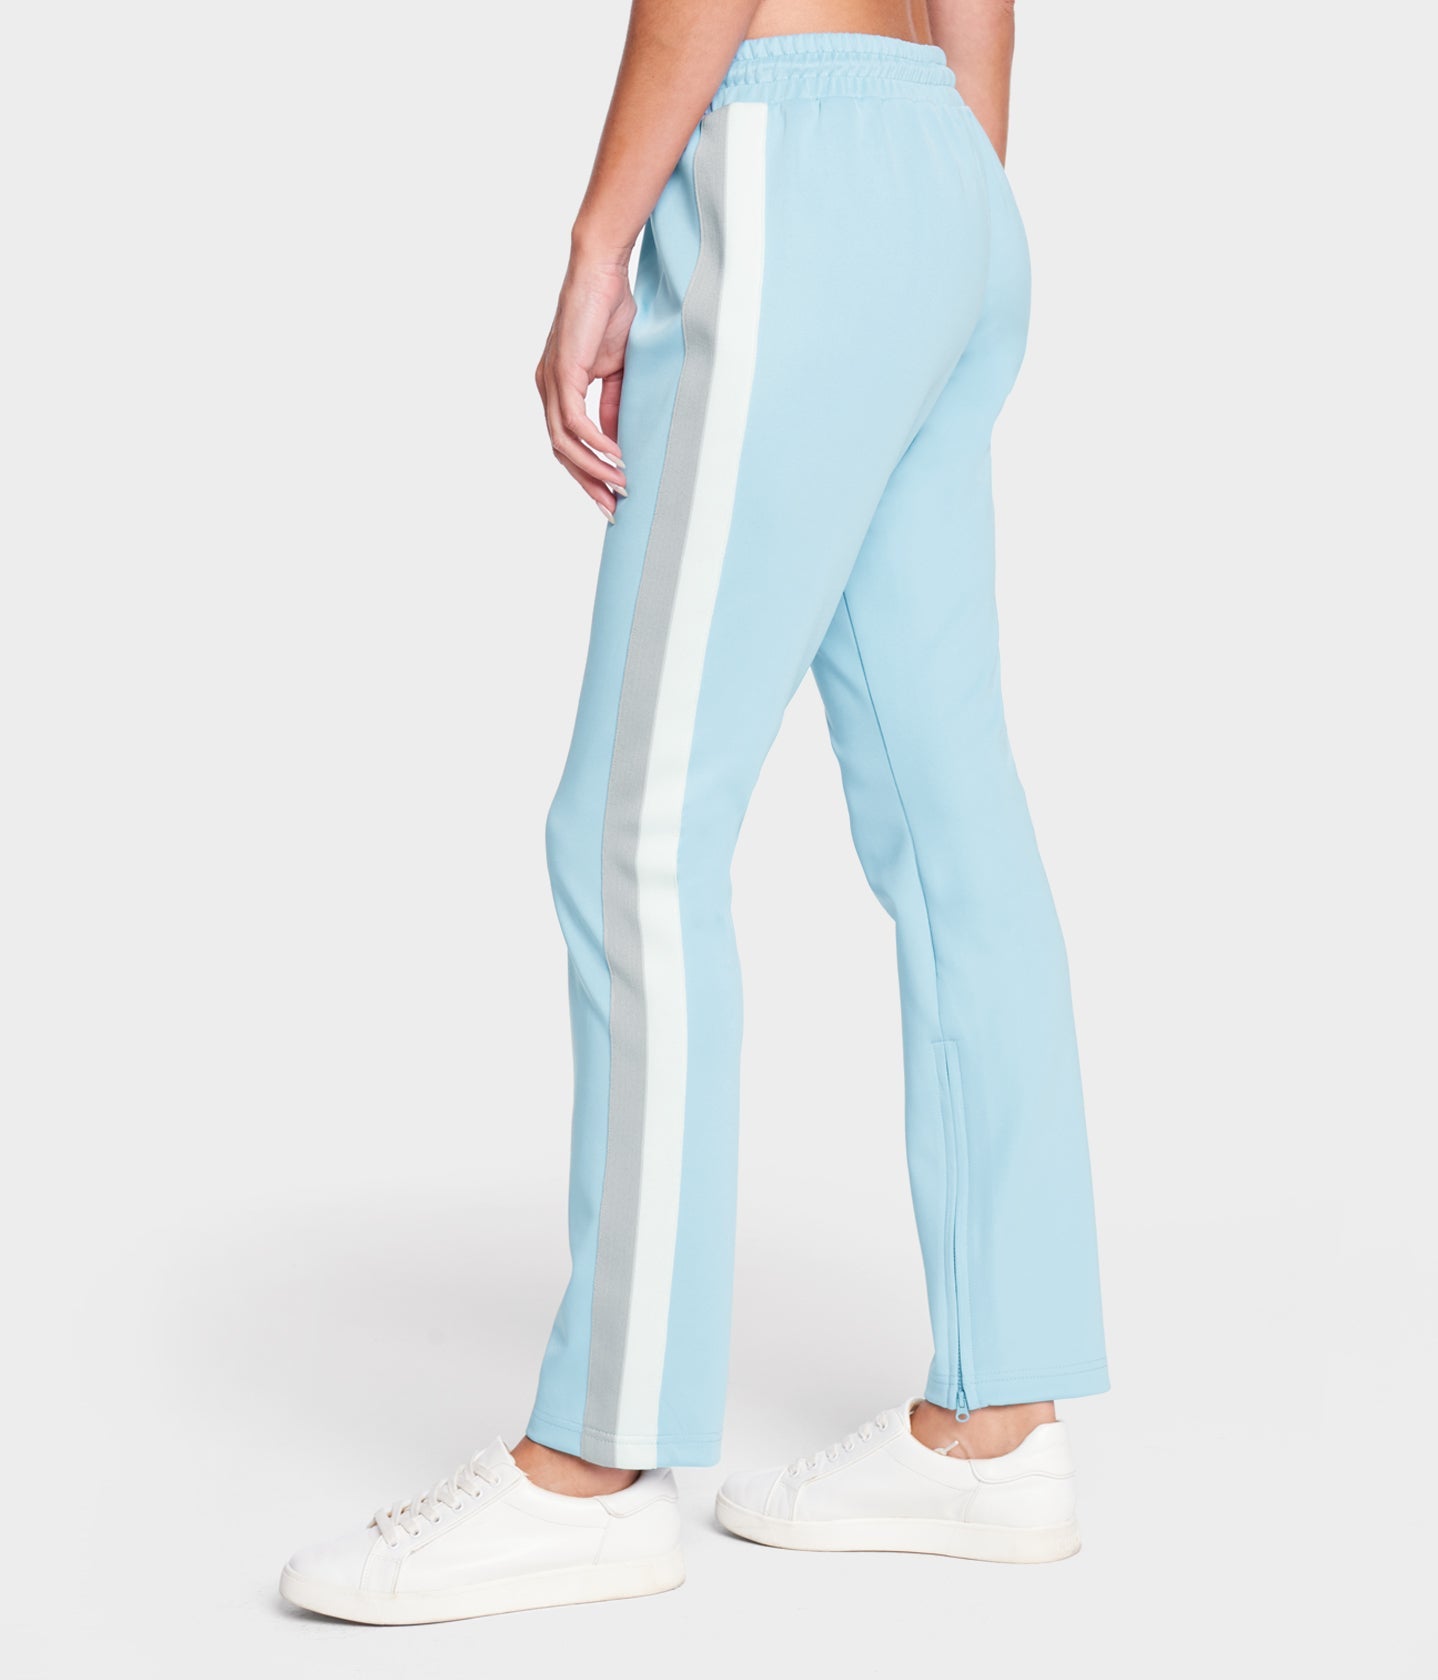 Cotton Track Pants For Women - Sky Blue at Rs 470.00 | Ladies Track Pants |  ID: 25476020112